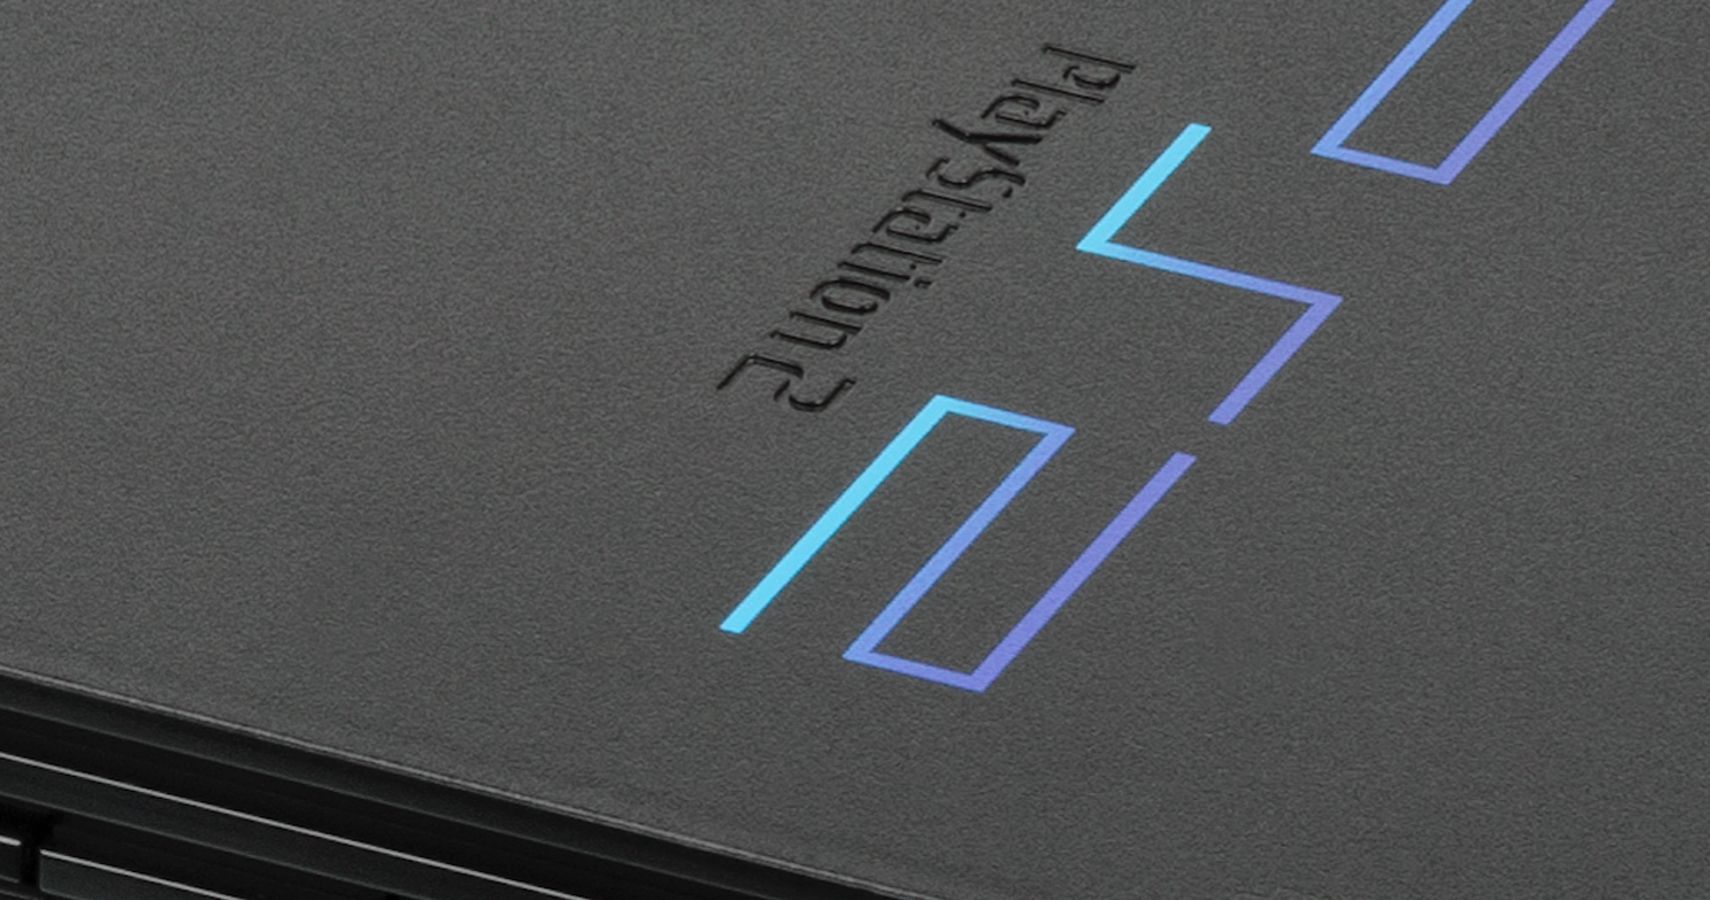 After nearly 20 years, Sony ends PlayStation 2 repair support in